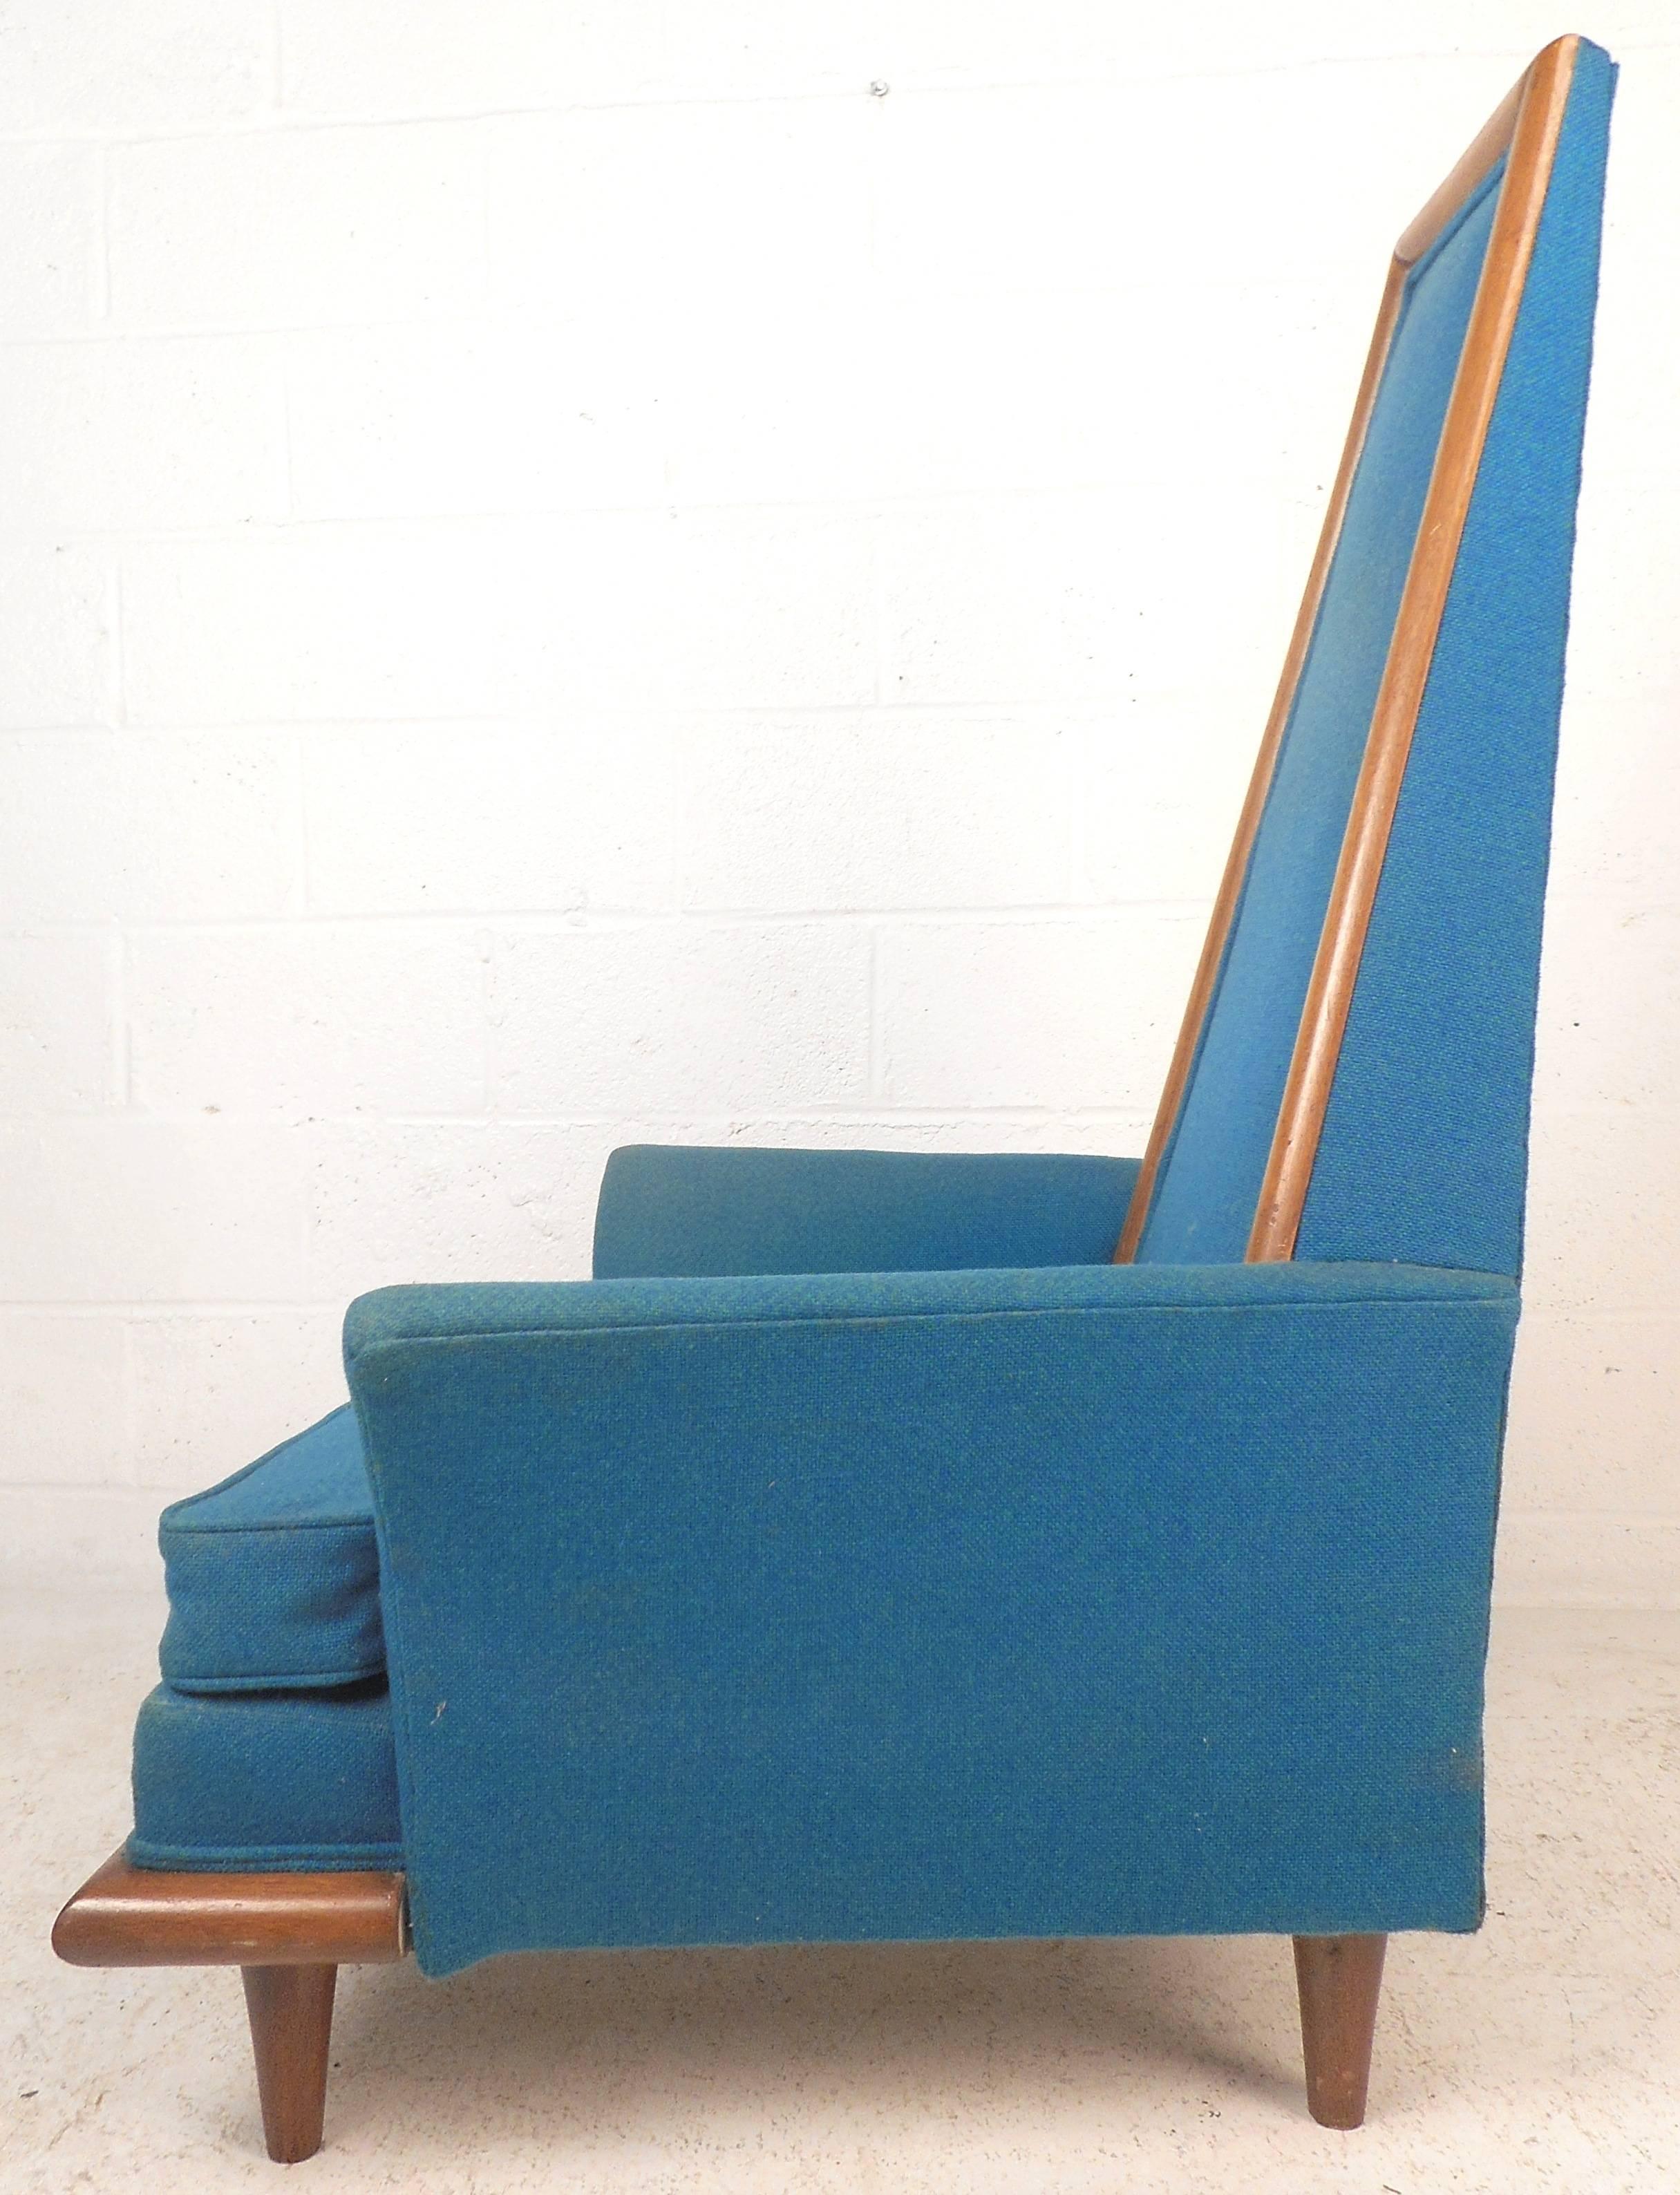 Beautiful vintage modern lounge chair features walnut trim around the sculpted backrest and base. Sleek design with unique winged arm rests, walnut legs, and elegant royal blue upholstery. The unusual shape displays quality craftsmanship making this